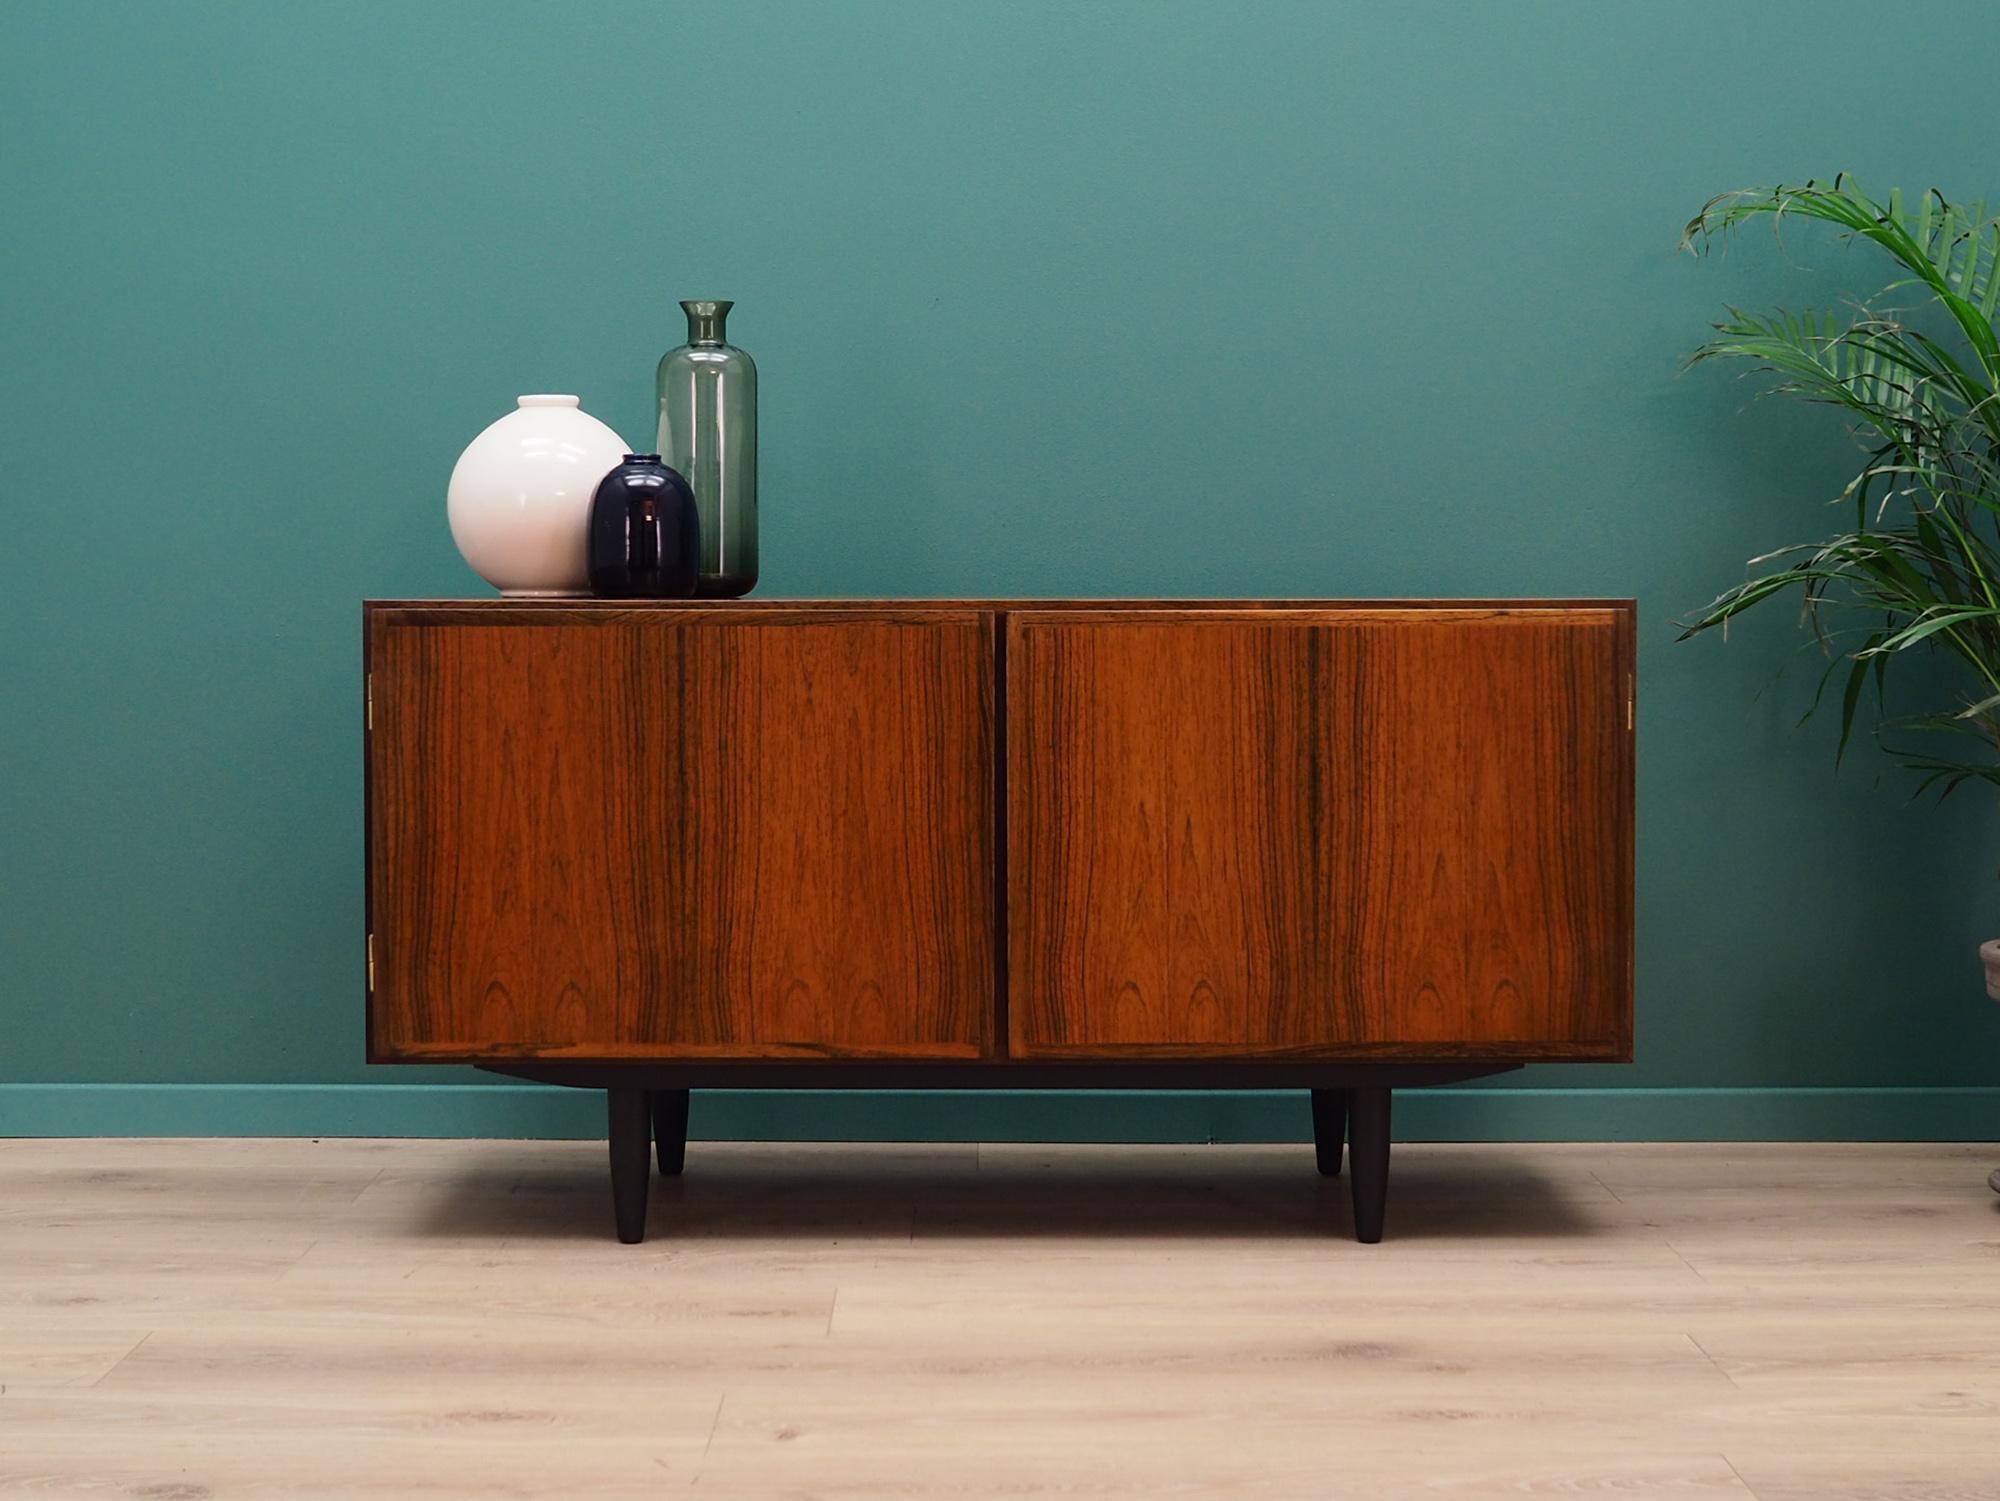 Fantastic cabinet from the 1960s-1970s. Scandinavian design, Minimalist form. Model #1 manufactured by Omann Jun. Surface of the furniture finished with rosewood veneer. Shelf and drawer in the interior. Preserved in good condition (minor bruises